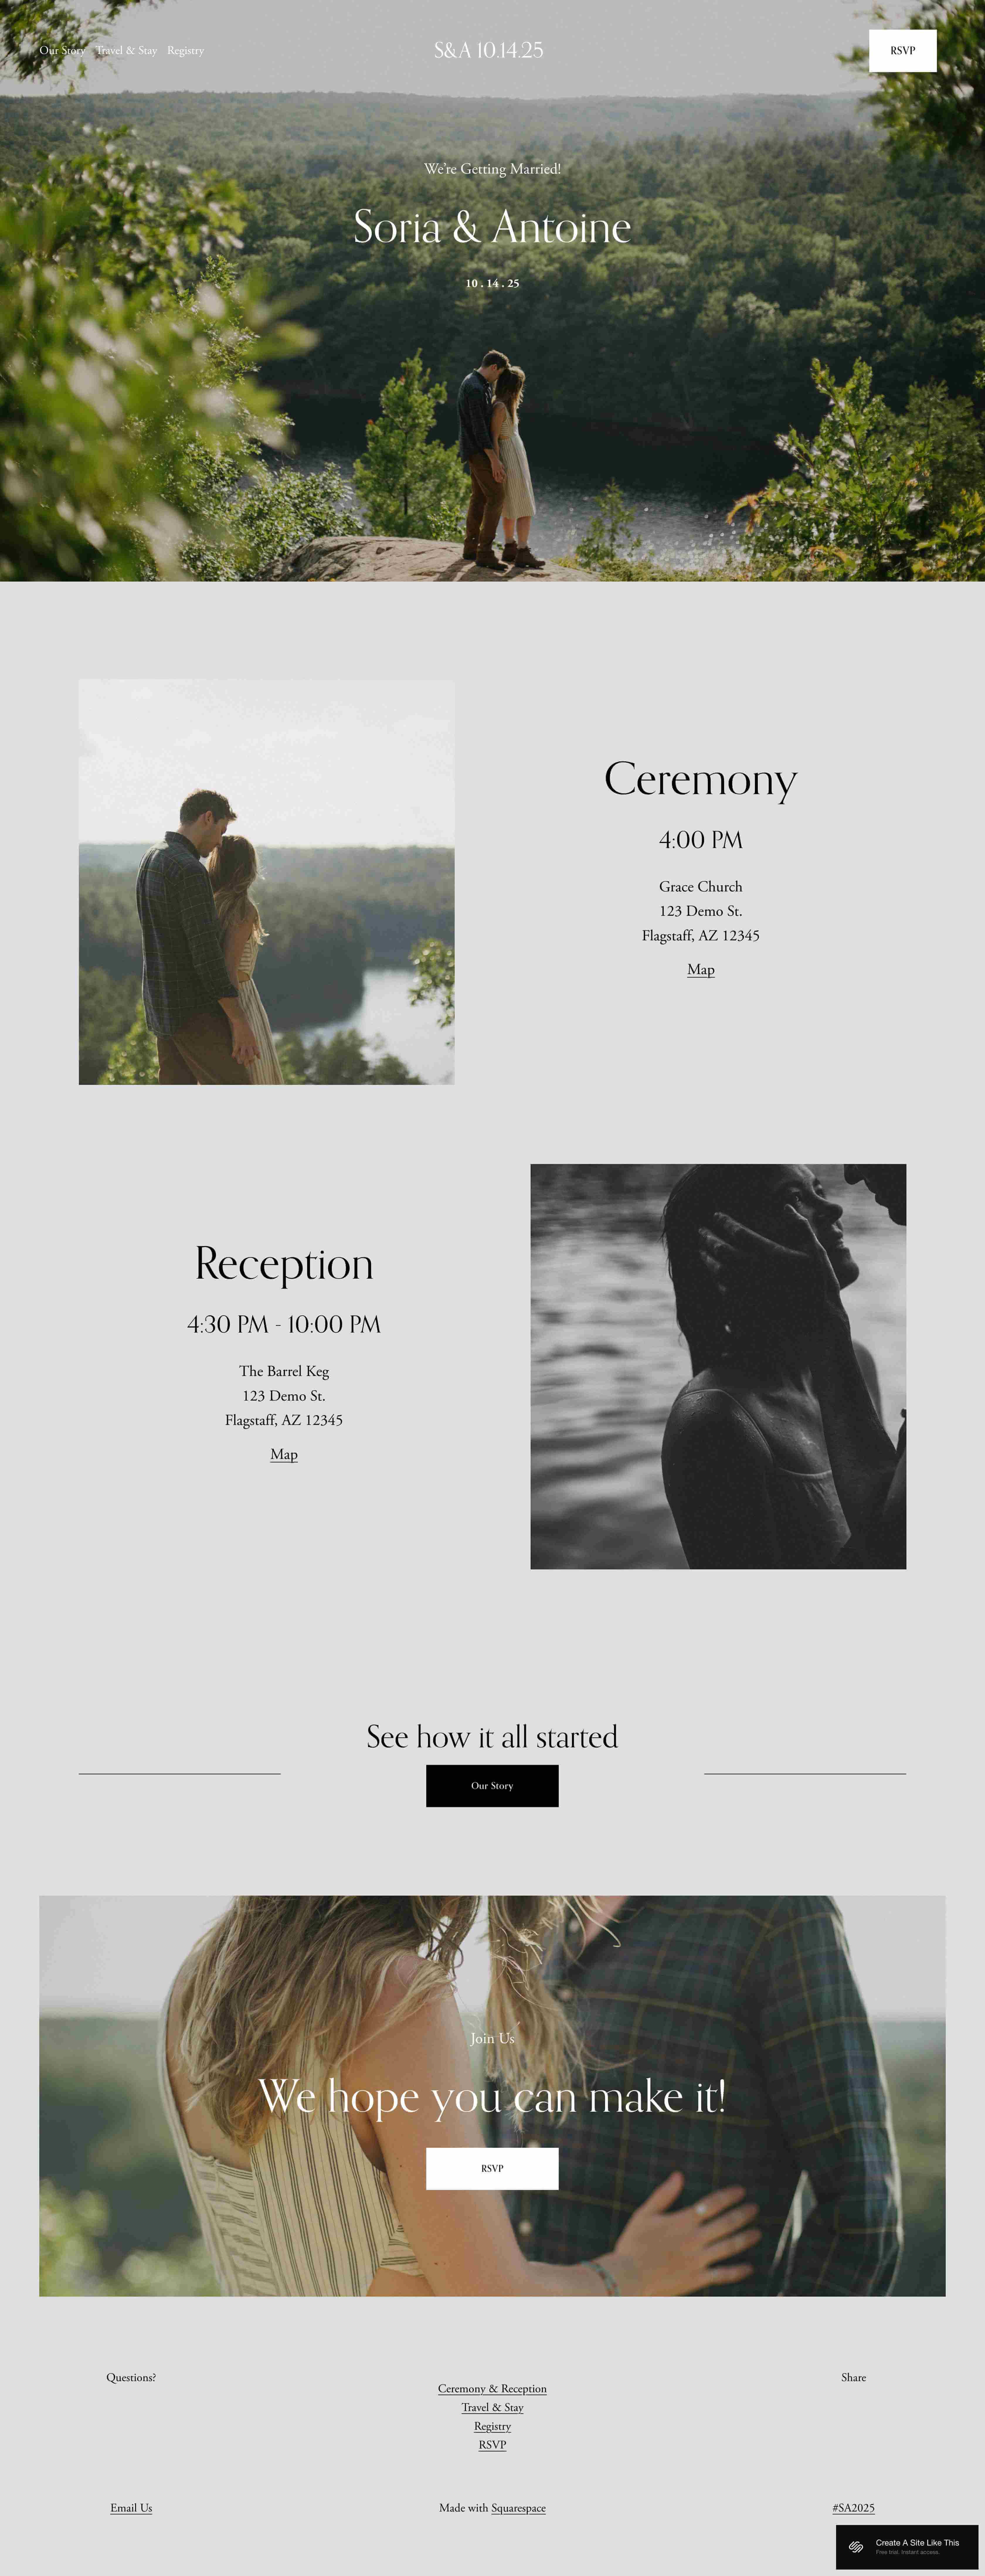 Squarespace Wedding Templates 3: Soria - Simple Layout with Elegant Photography